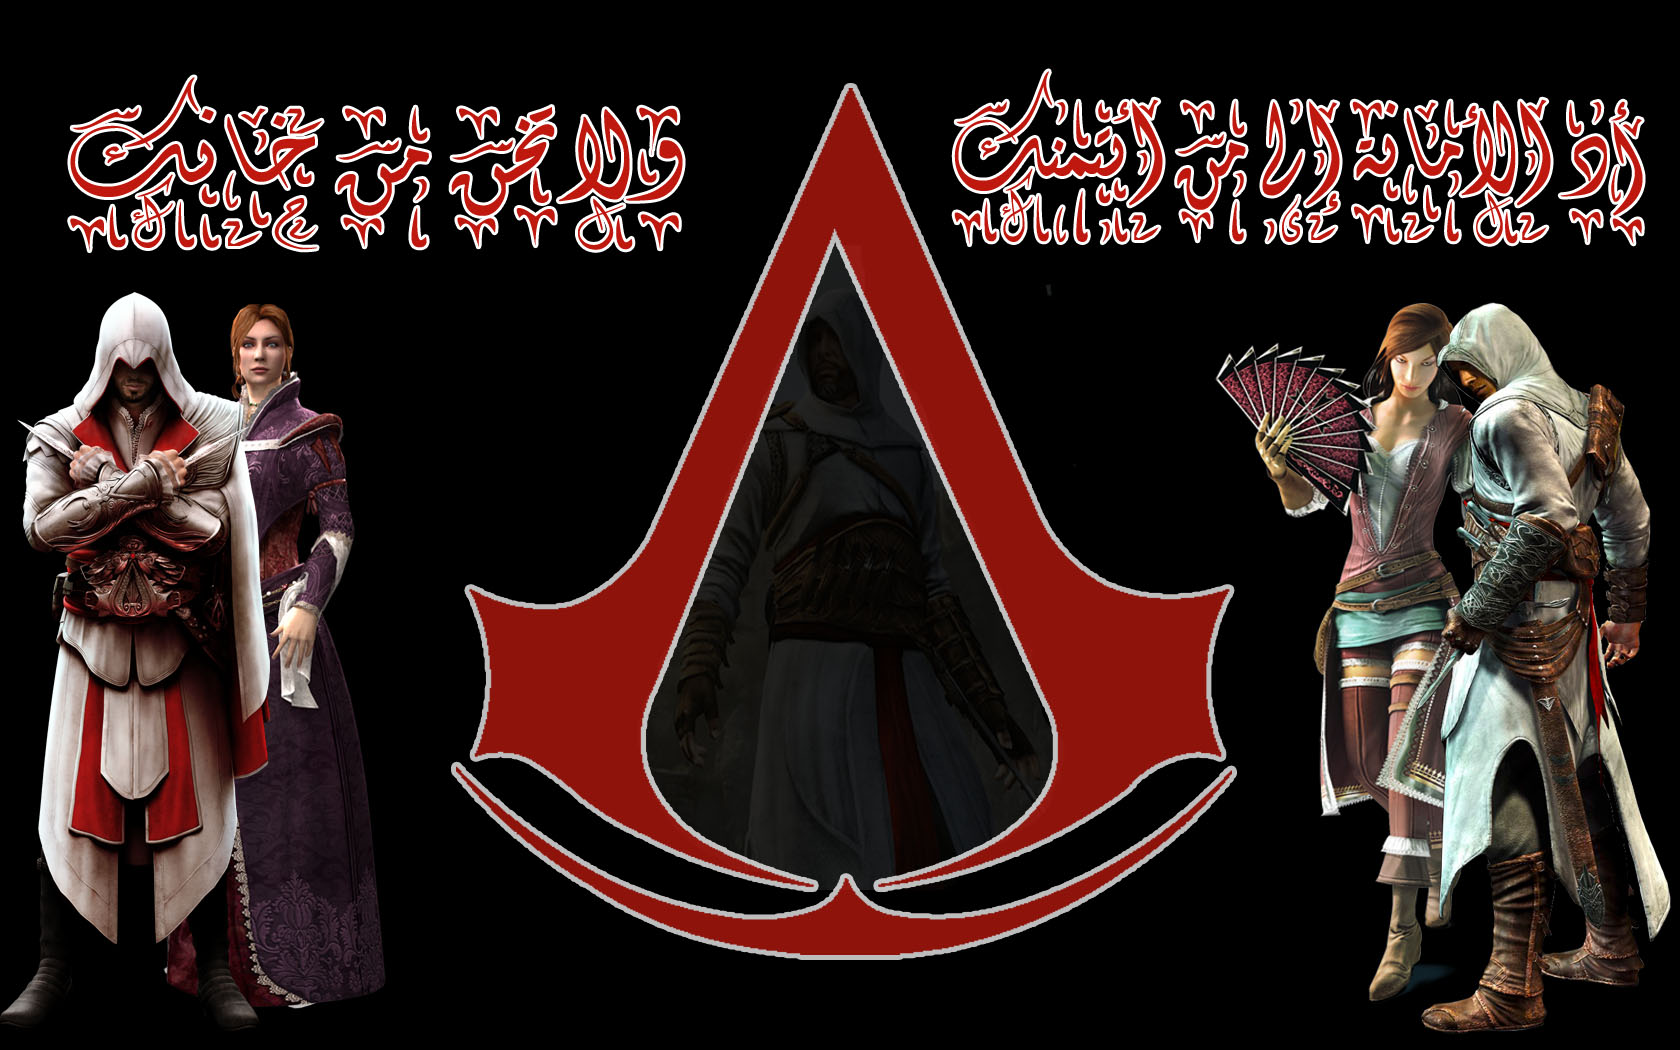 video game, assassin's creed, altair (assassin's creed), ezio (assassin's creed)